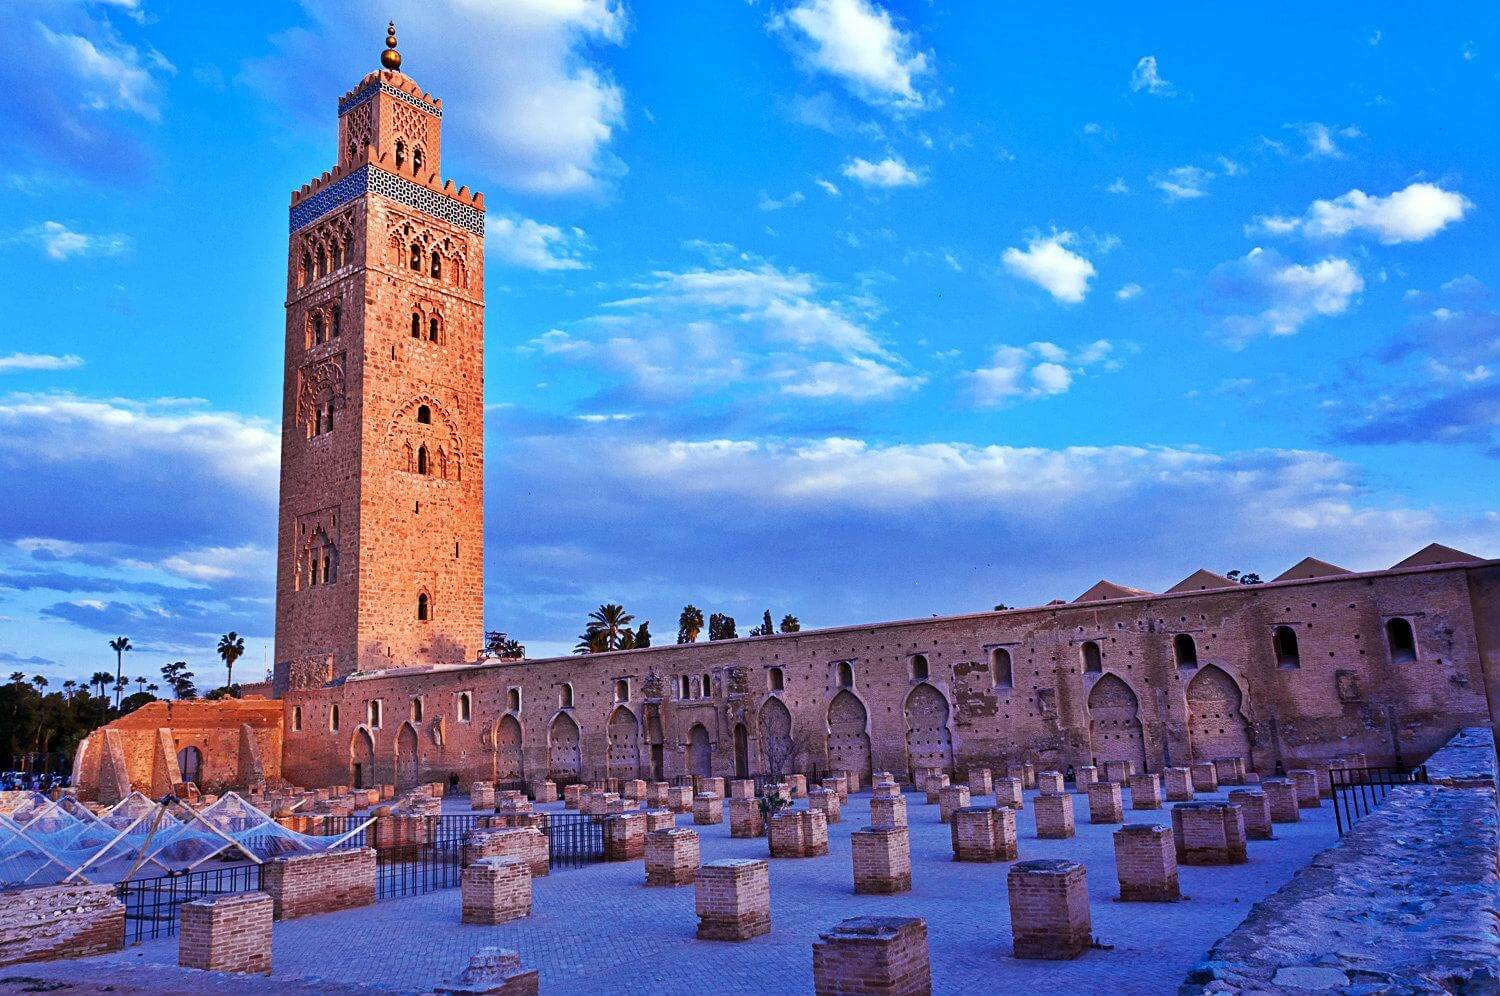 Exterior view of the iconic Koutoubia Mosque against a clear blue sky, showcasing intricate architectural details and towering minaret.